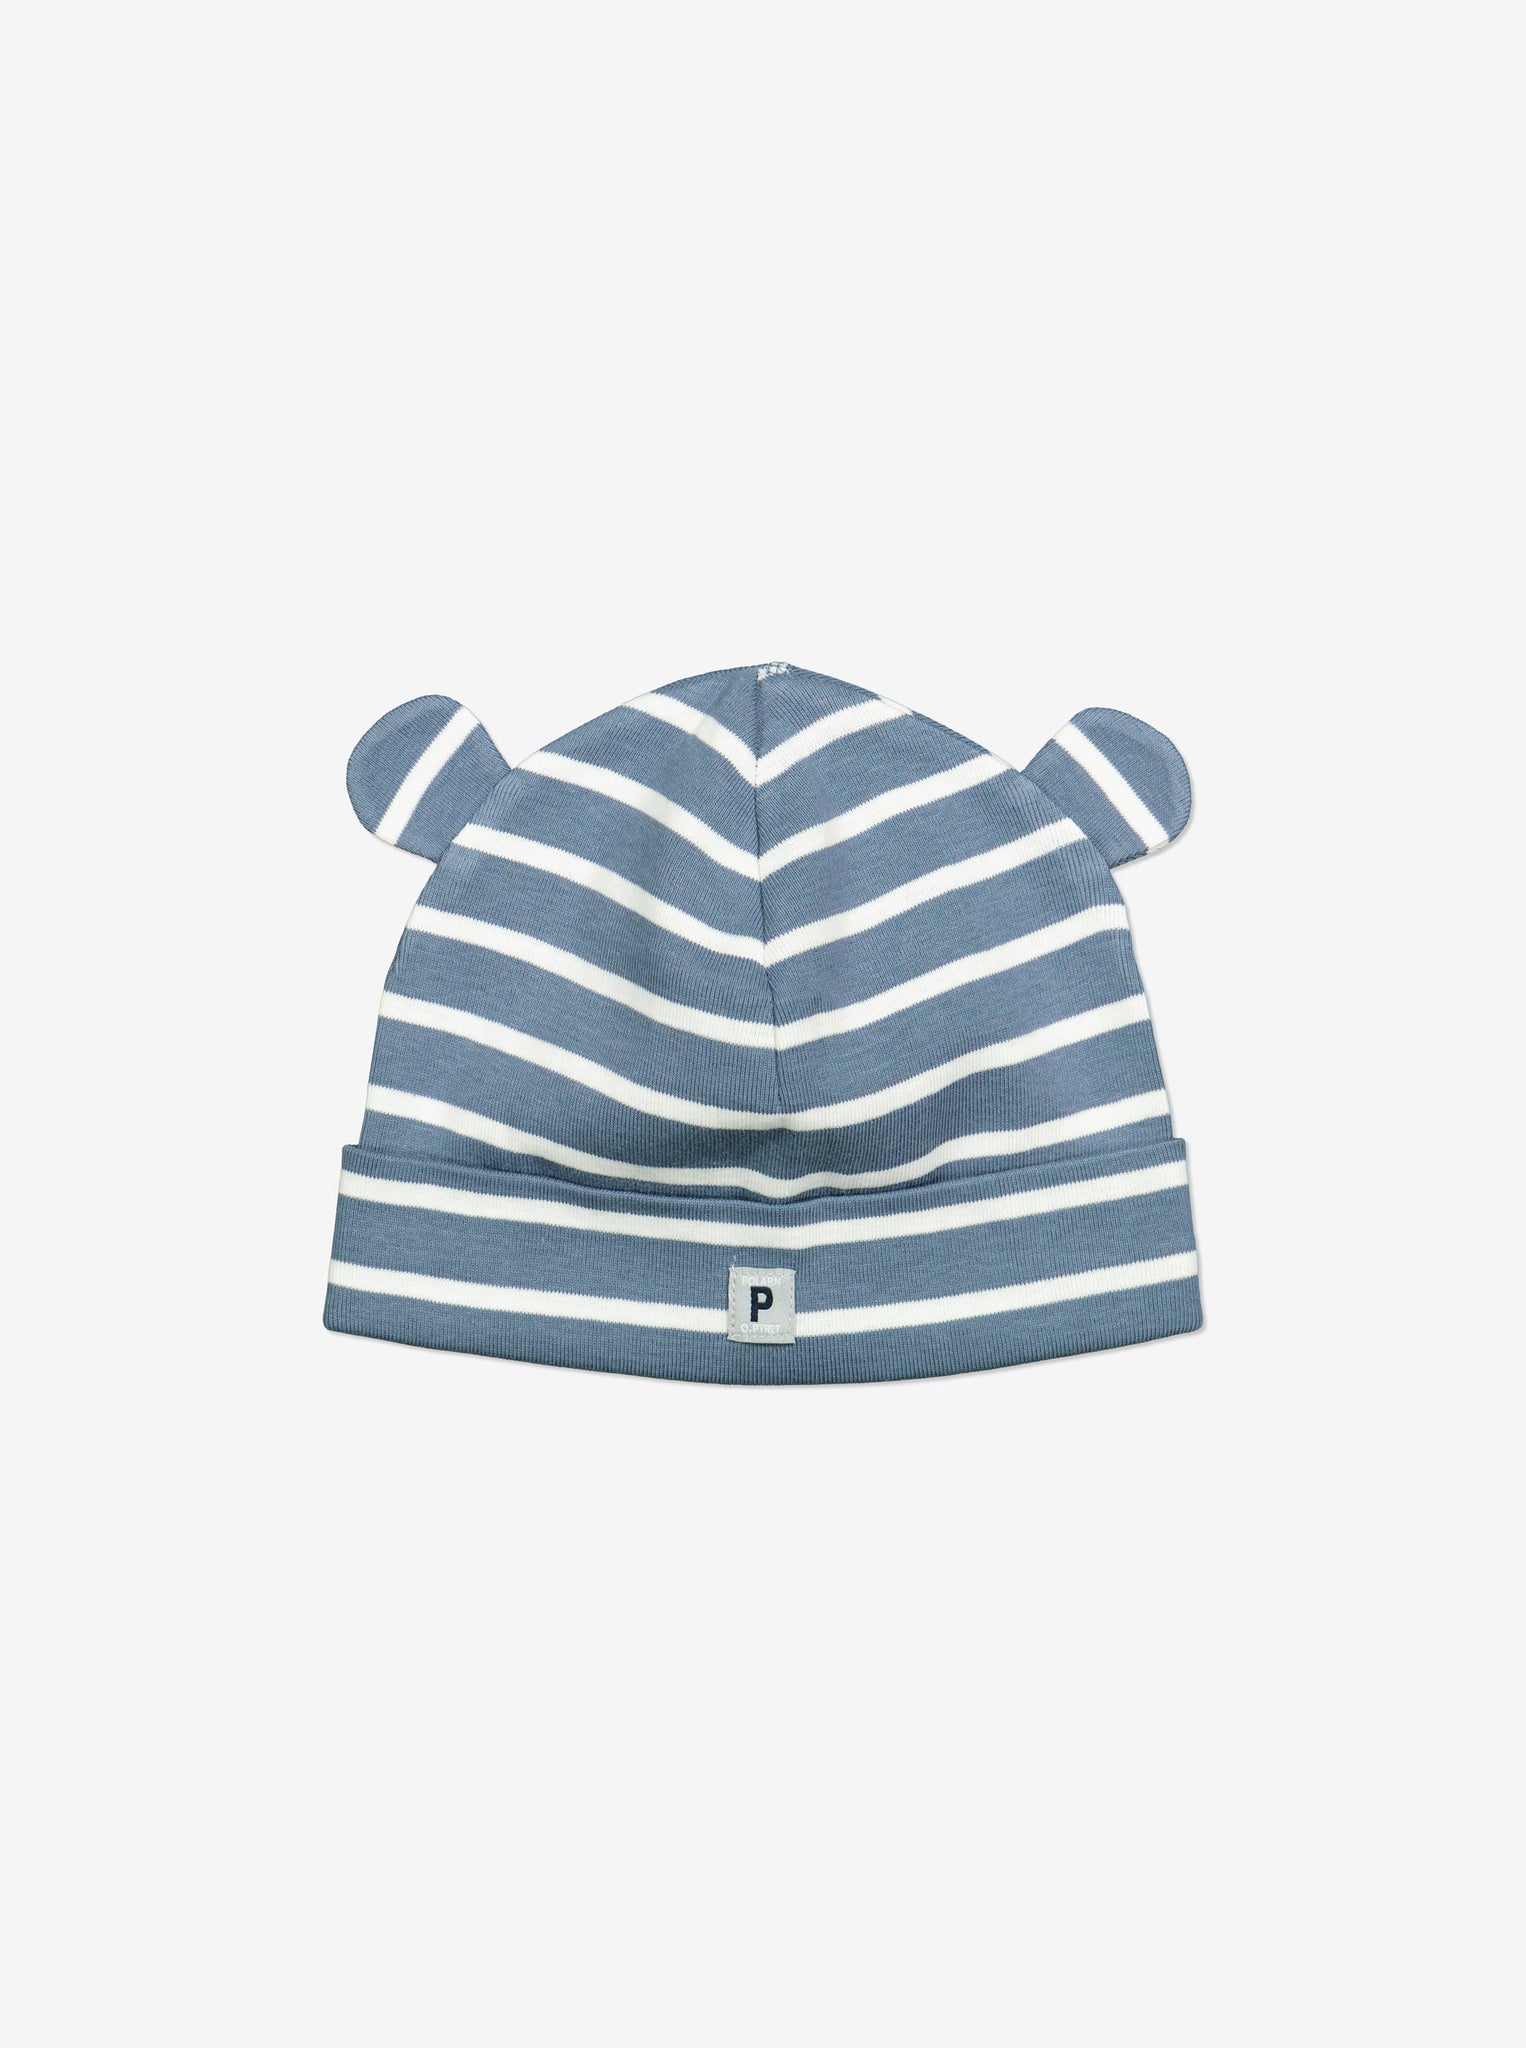  Organic Blue Baby Beanie Hat from Polarn O. Pyret Kidswear. Made with 100% organic cotton.